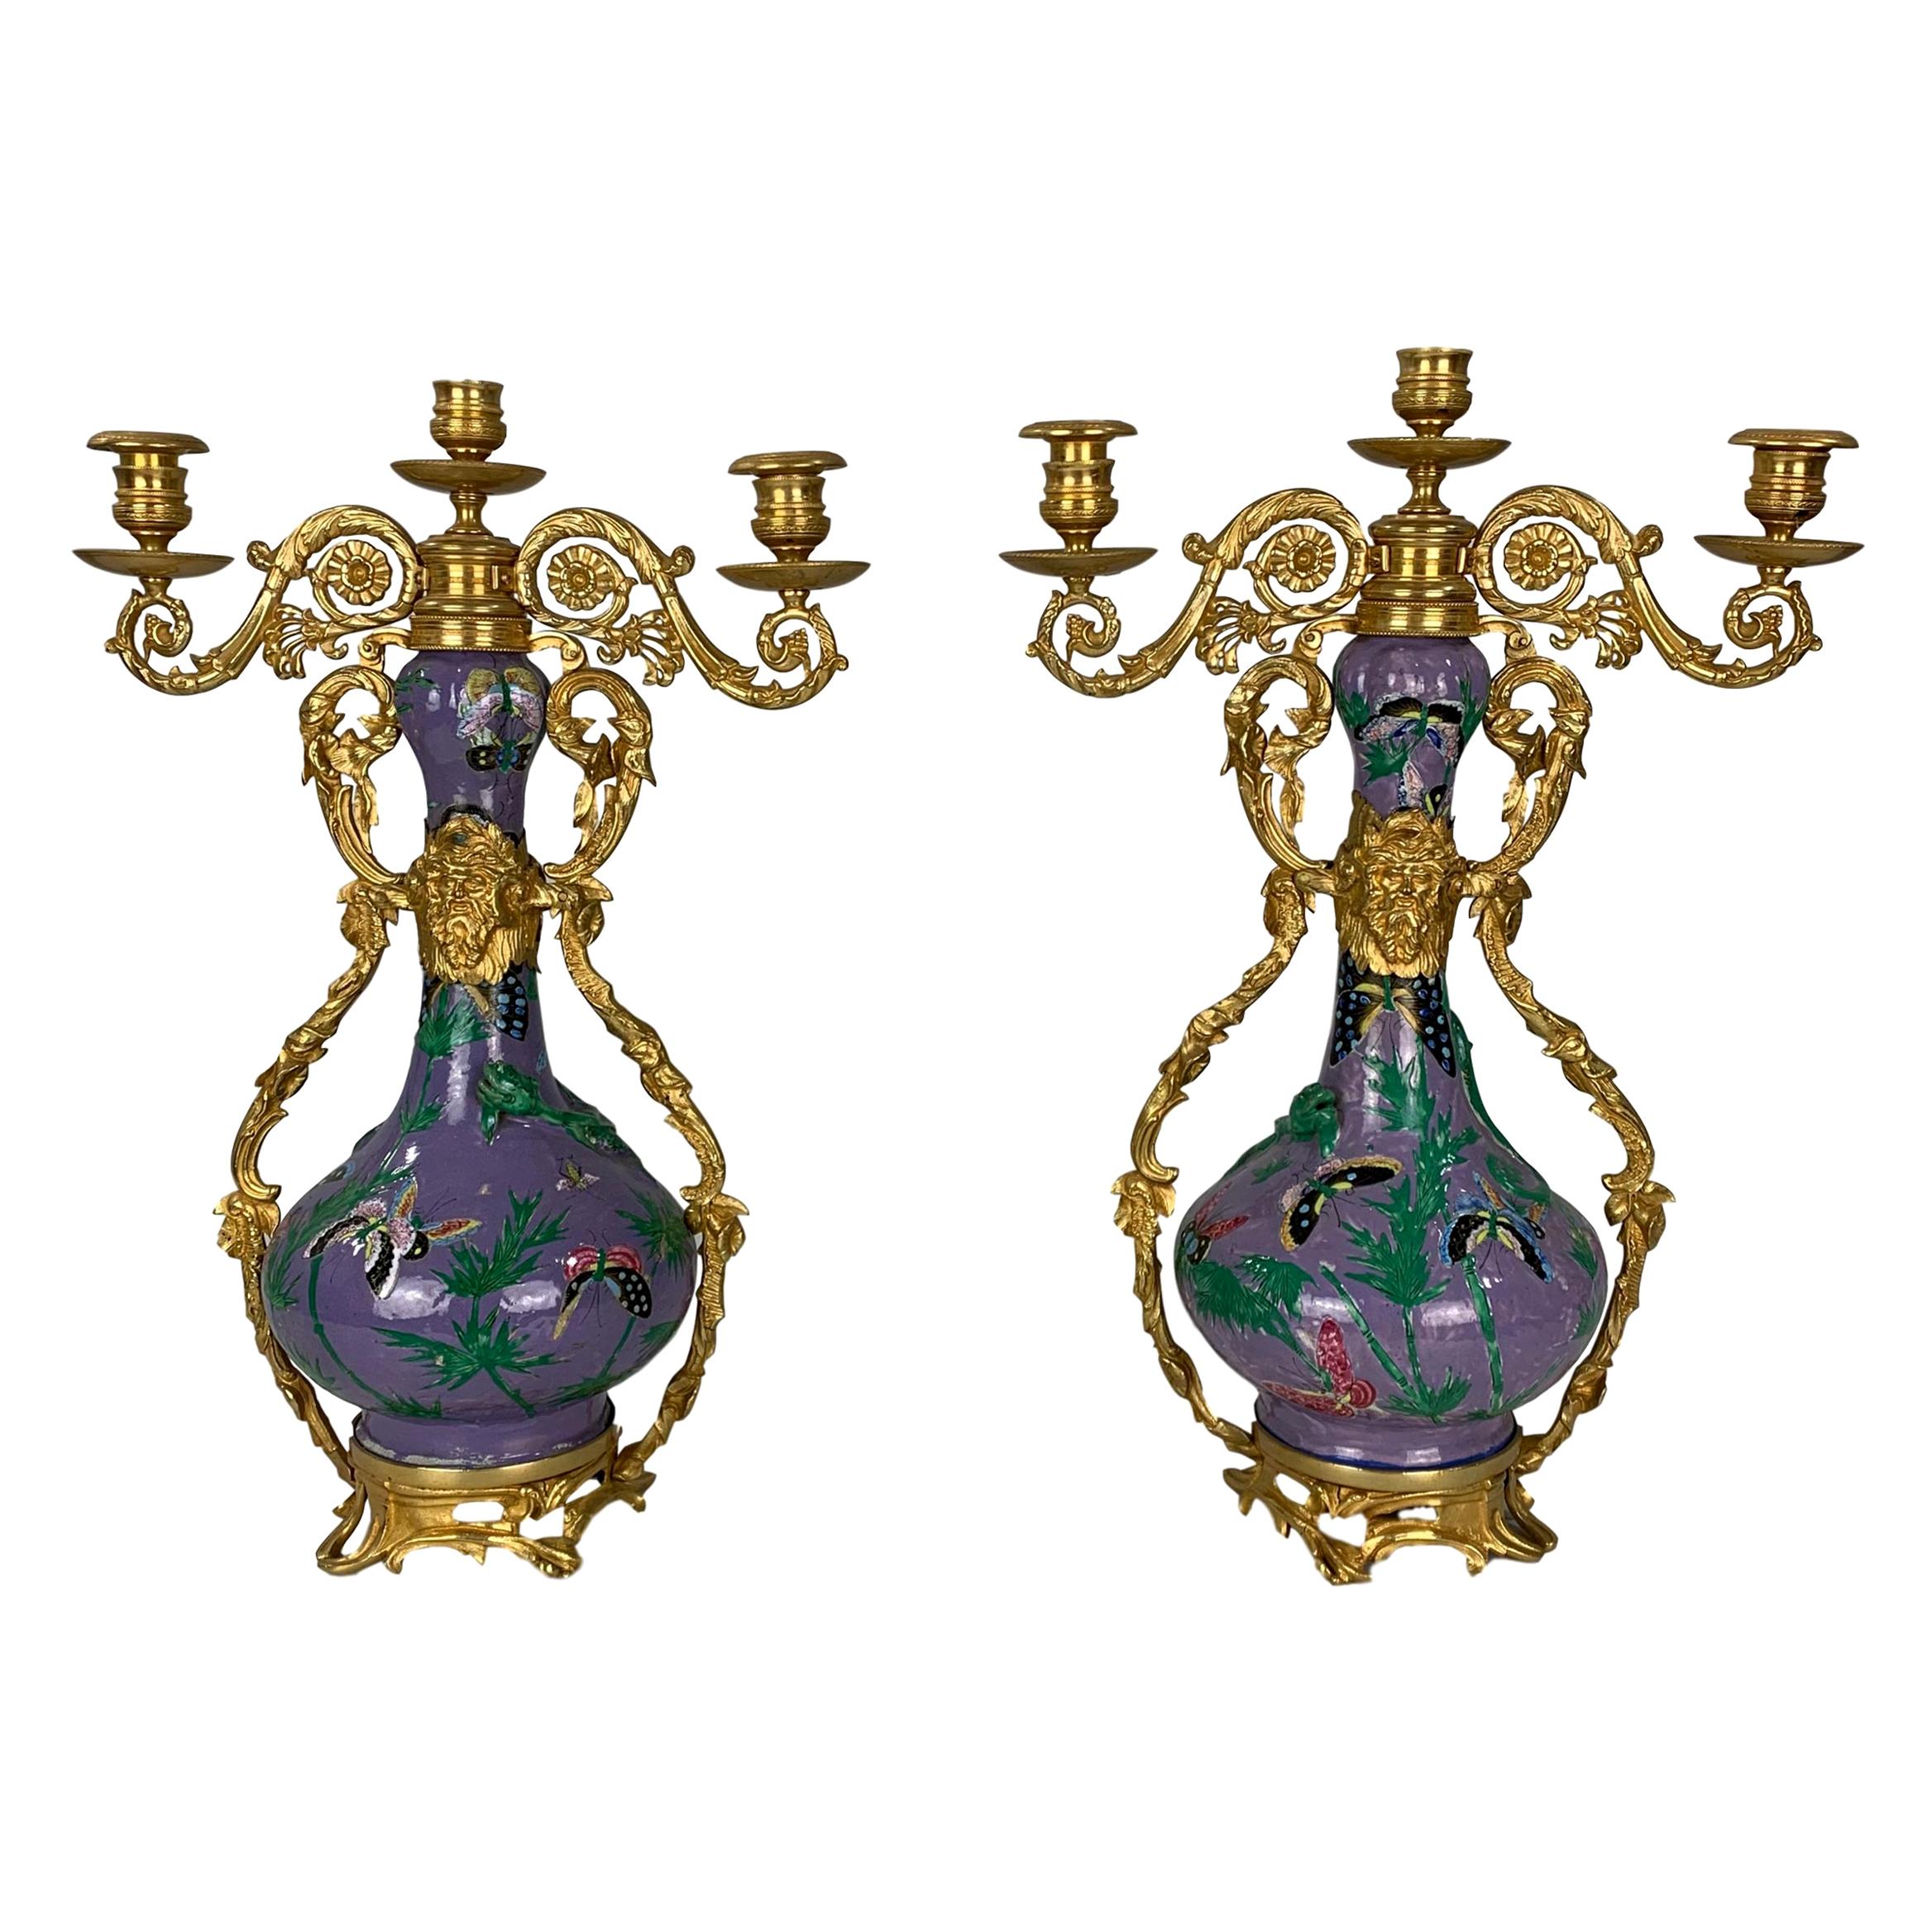 Pair of Bronze Ormolu-Mounted Chinese Export Porcelain Vases, Qing Dynasty